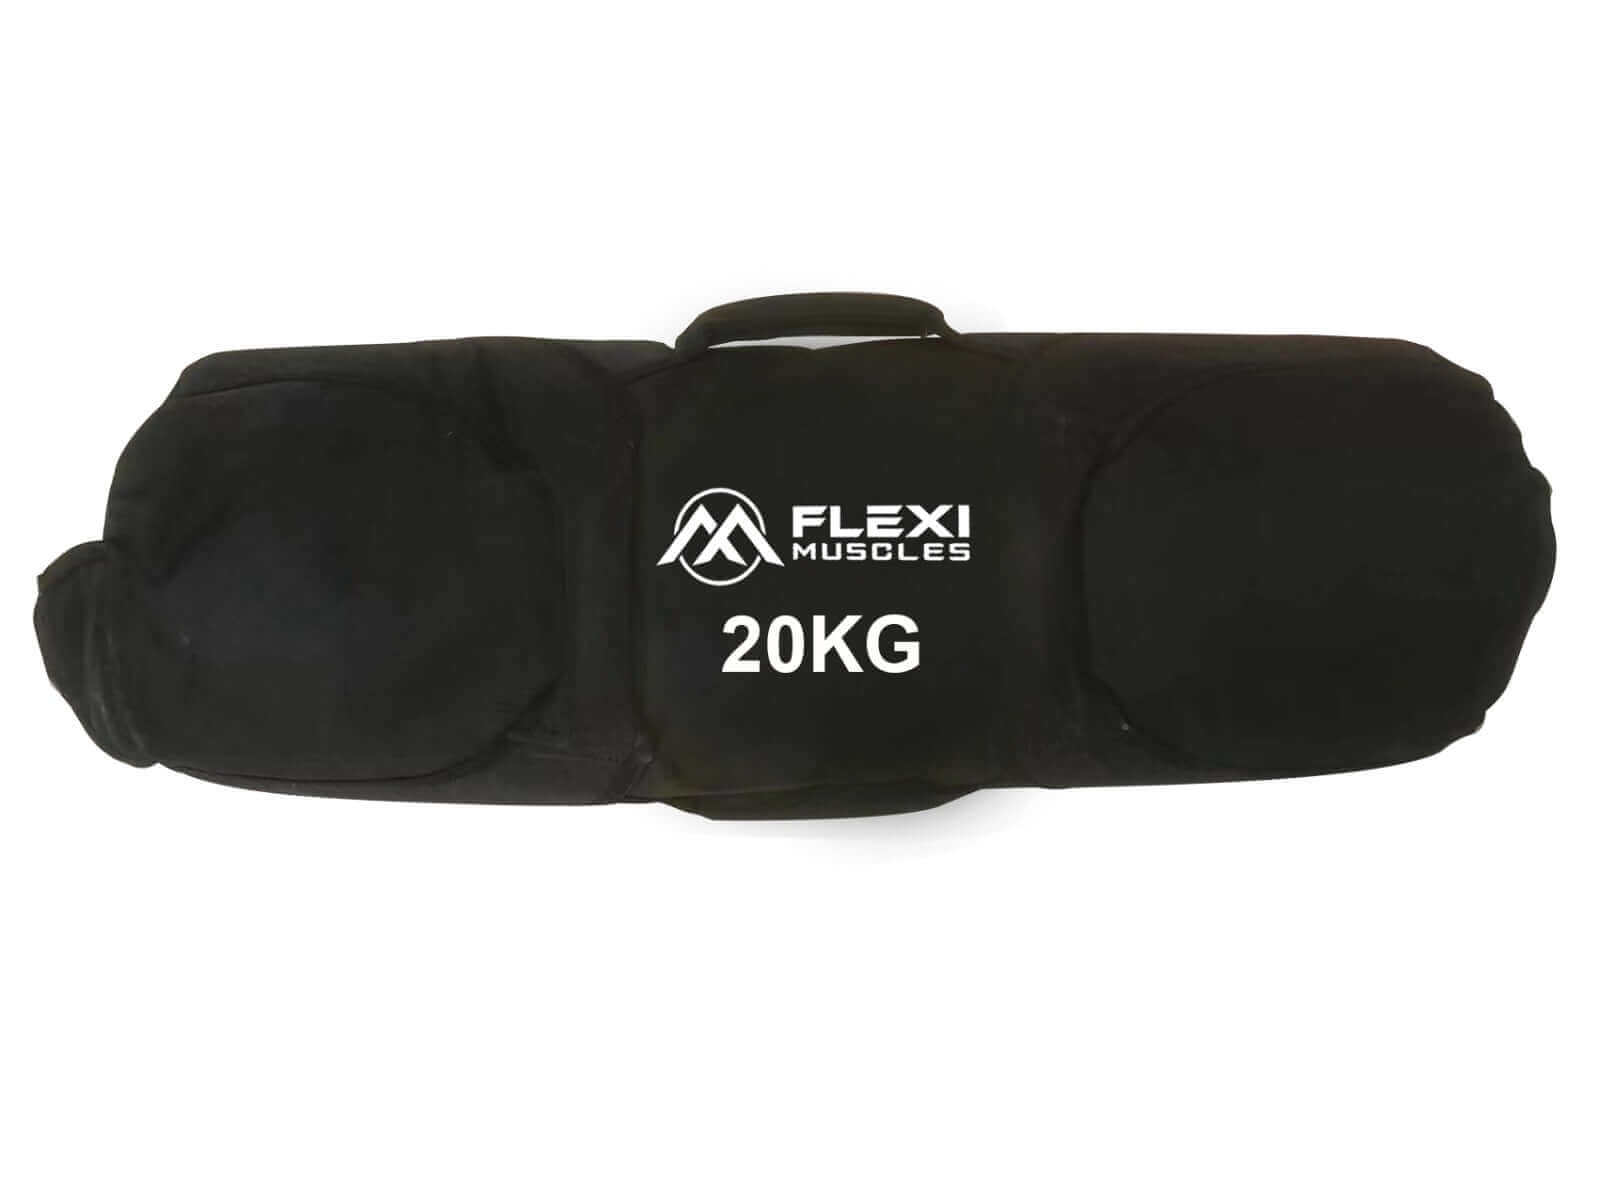 Flexi Muscles – Adjustable Sandbags, with Filler bags.